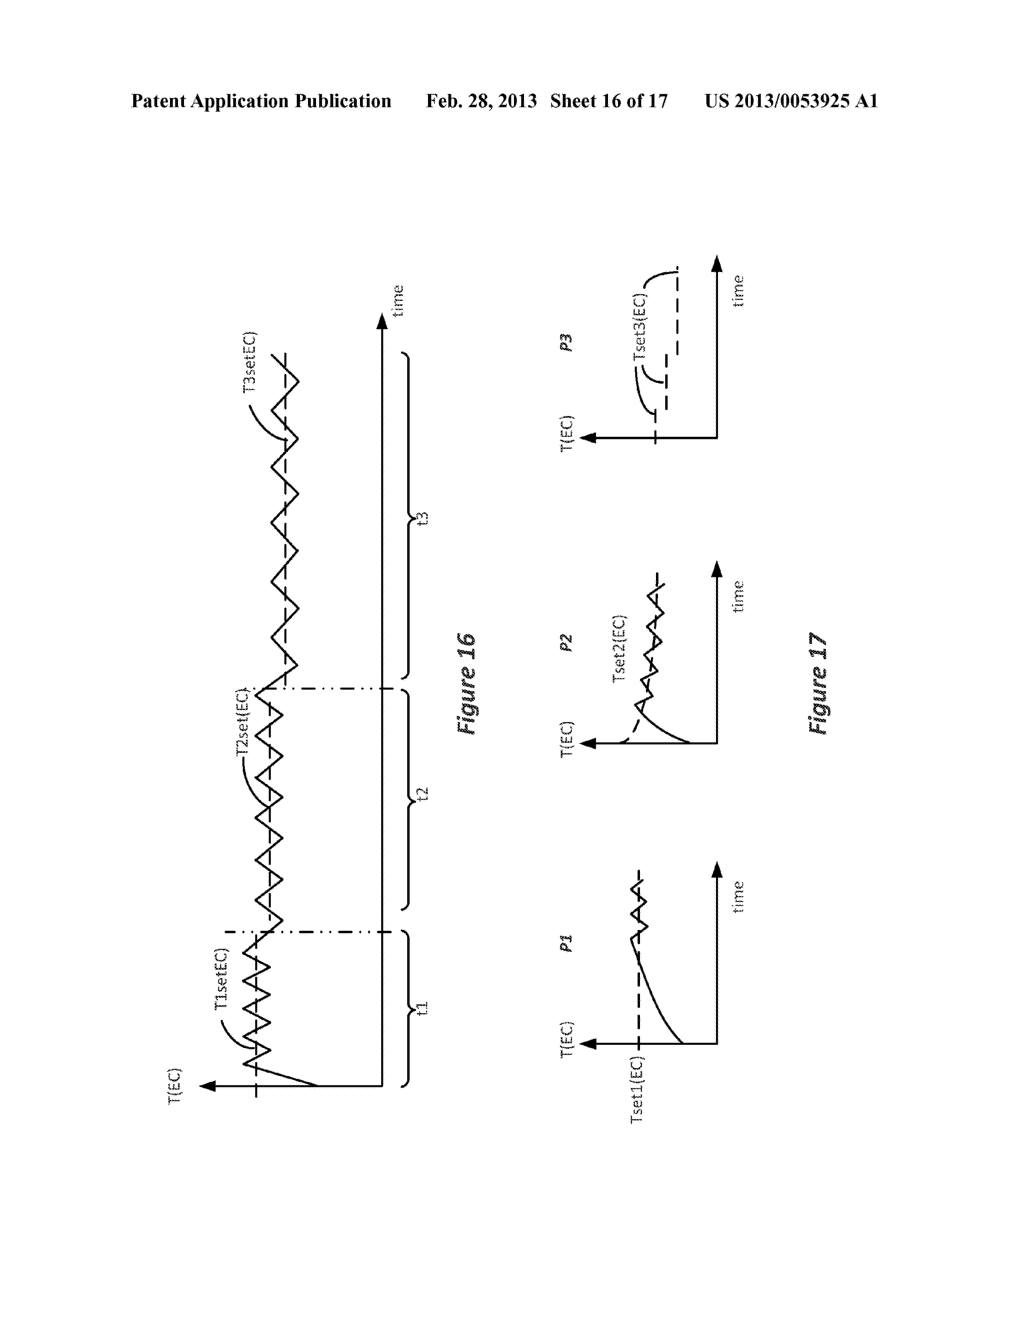 External Charger Usable with an Implantable Medical Device Having a     Programmable or Time-Varying Temperature Set Point - diagram, schematic, and image 17